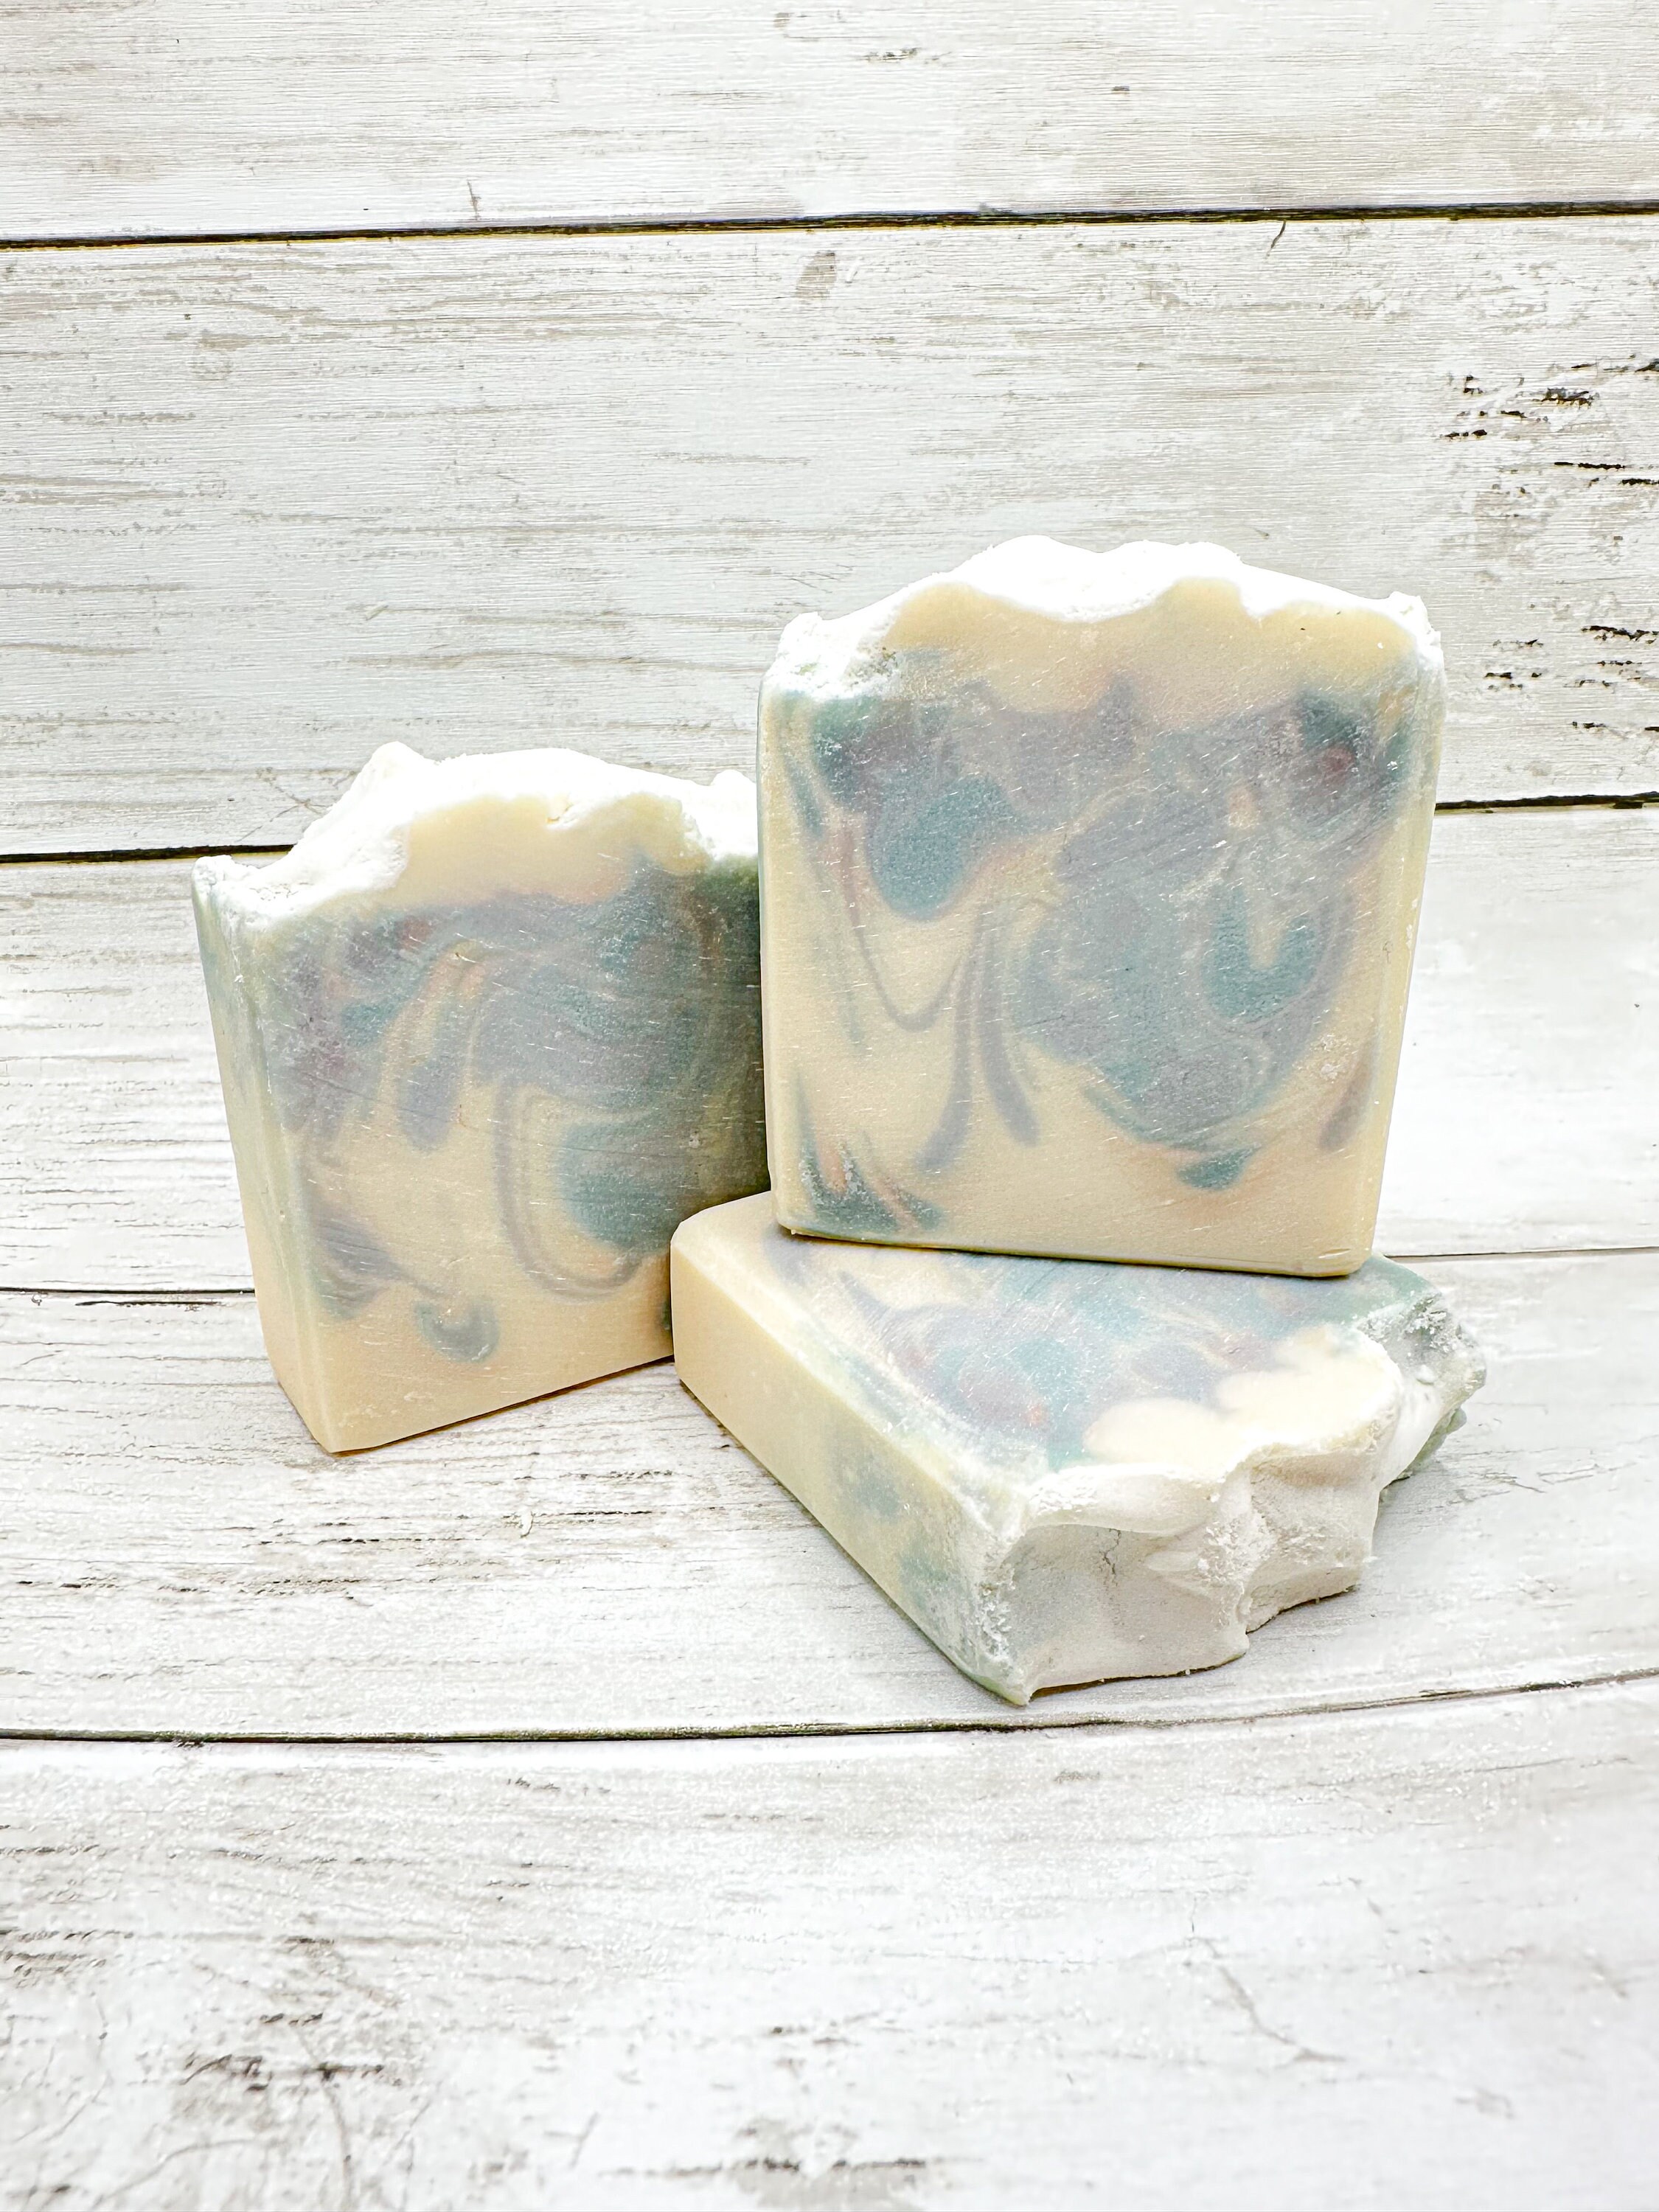 Evergreen & Berries, Handcrafted Hand & Body Soap Bar